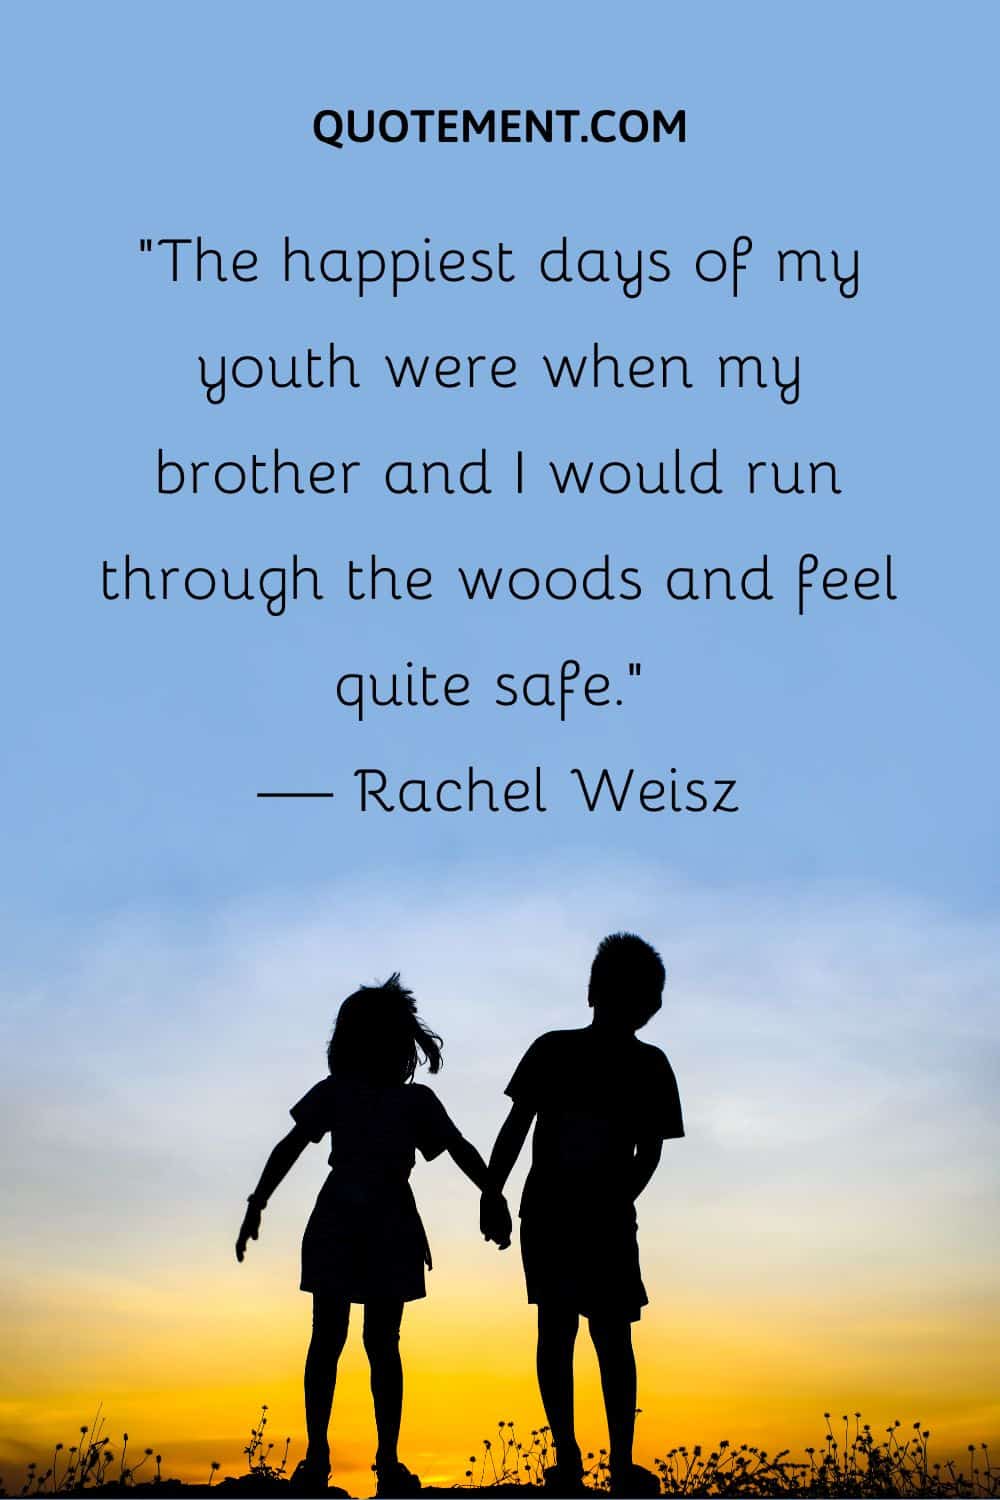 “The happiest days of my youth were when my brother and I would run through the woods and feel quite safe.” — Rachel Weisz